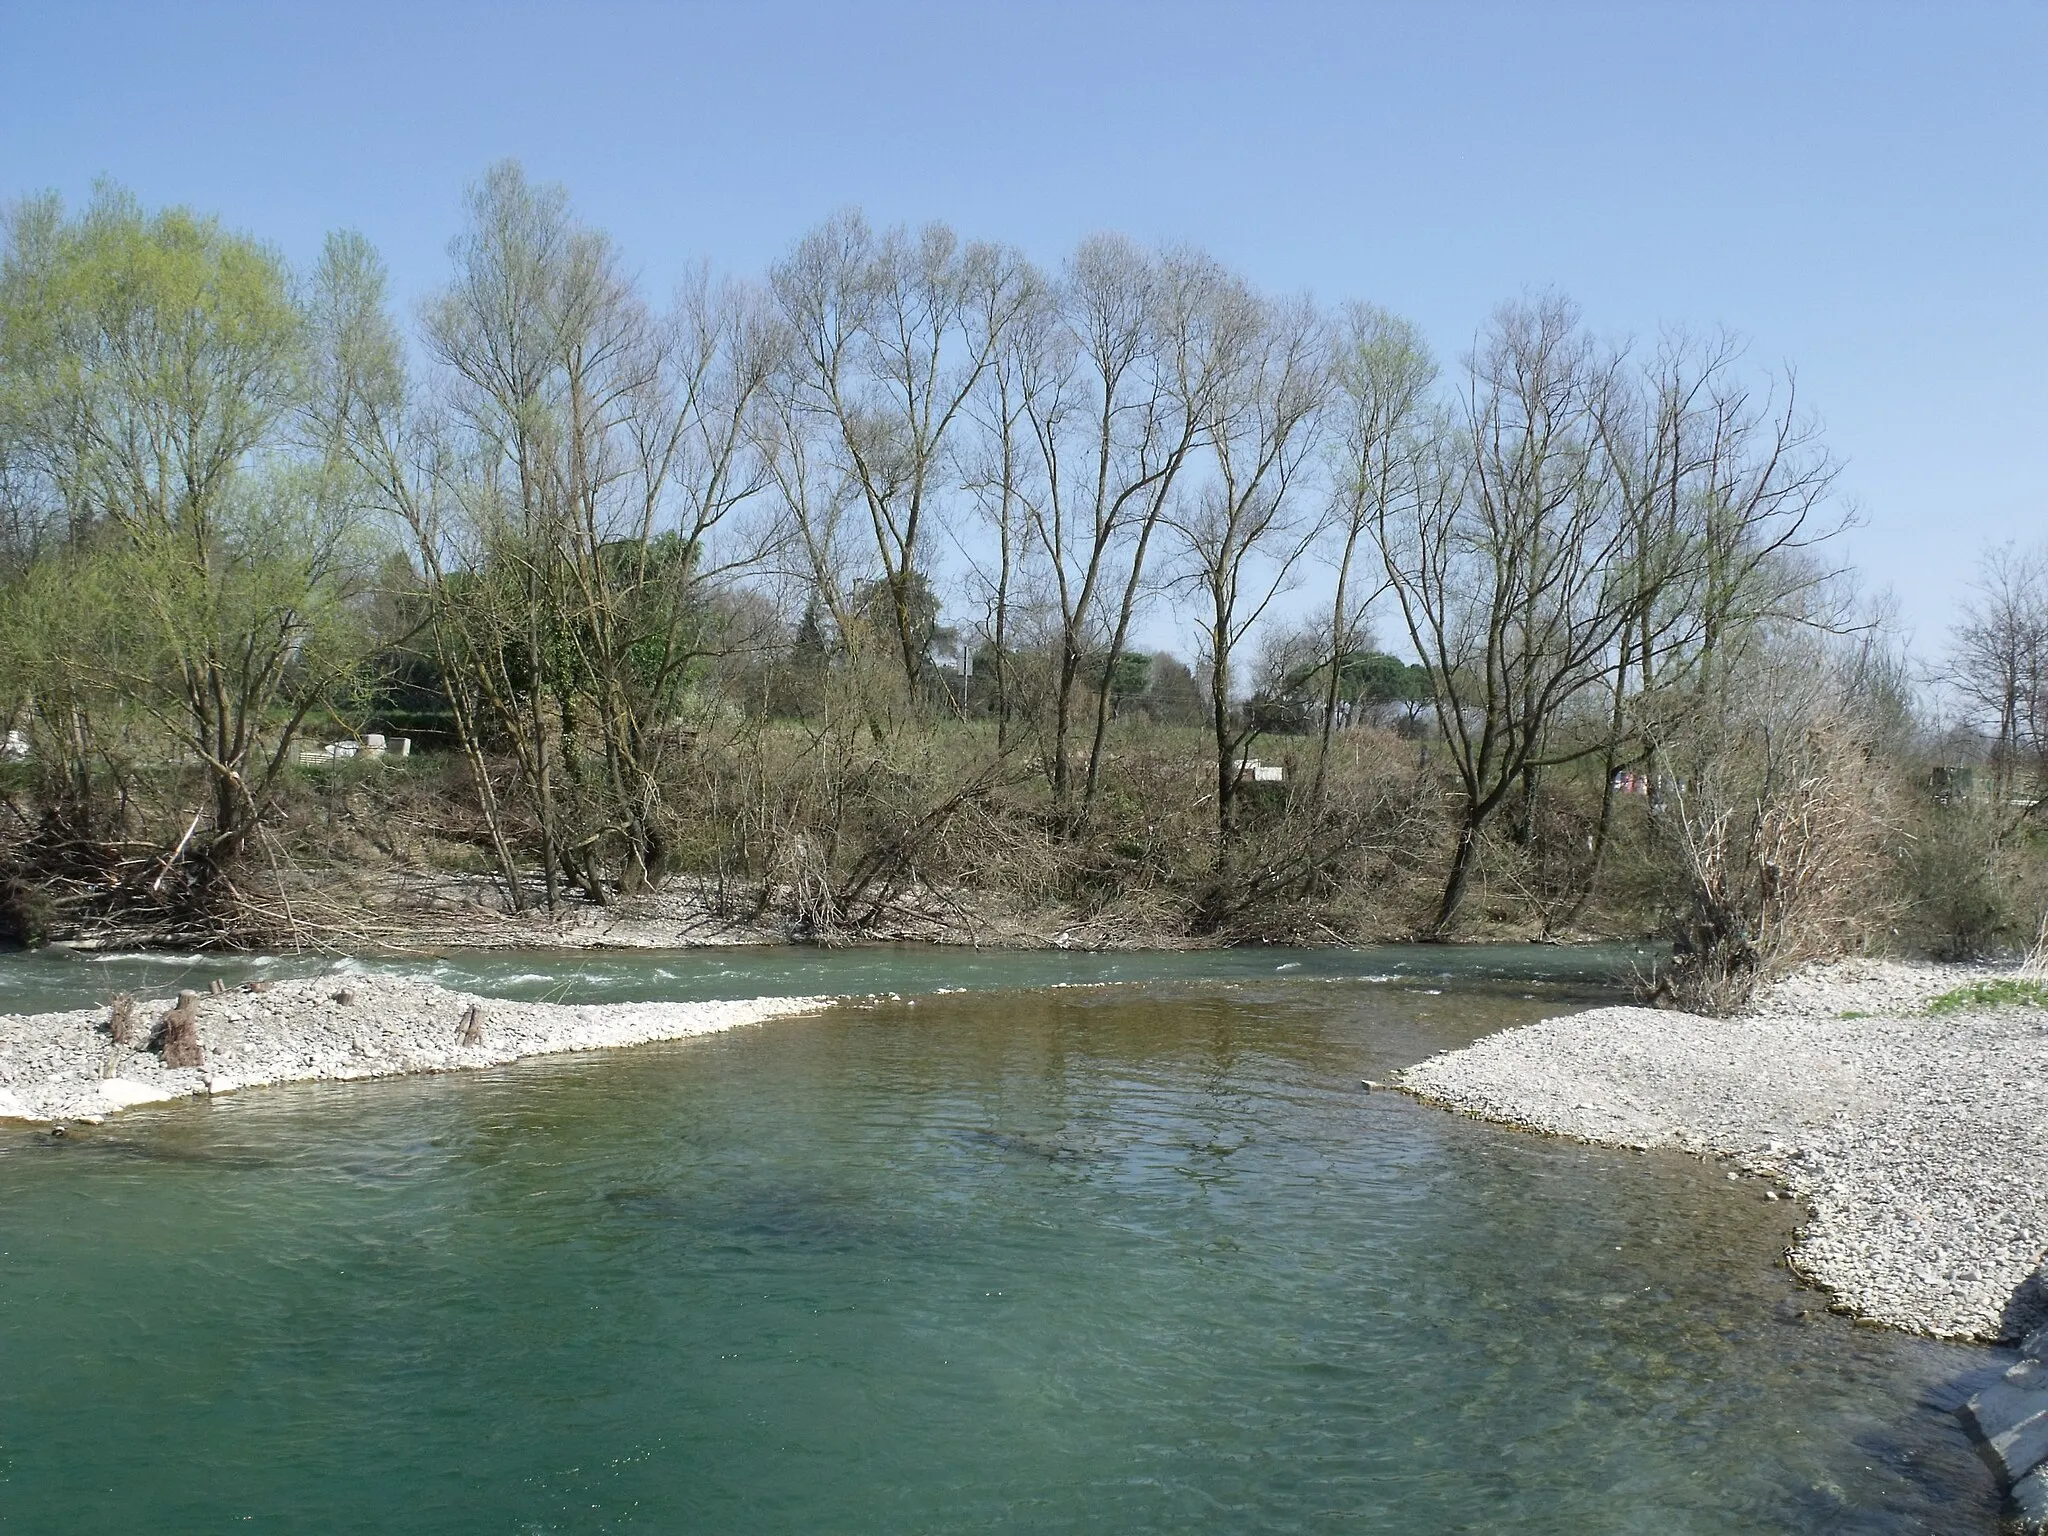 Photo showing: Confluence of the Carza River (right) and the Sieve River (left) in San Piero a Sieve, Scarperia e San Piero, Mugello, Province of Florence, Tuscany, Italy